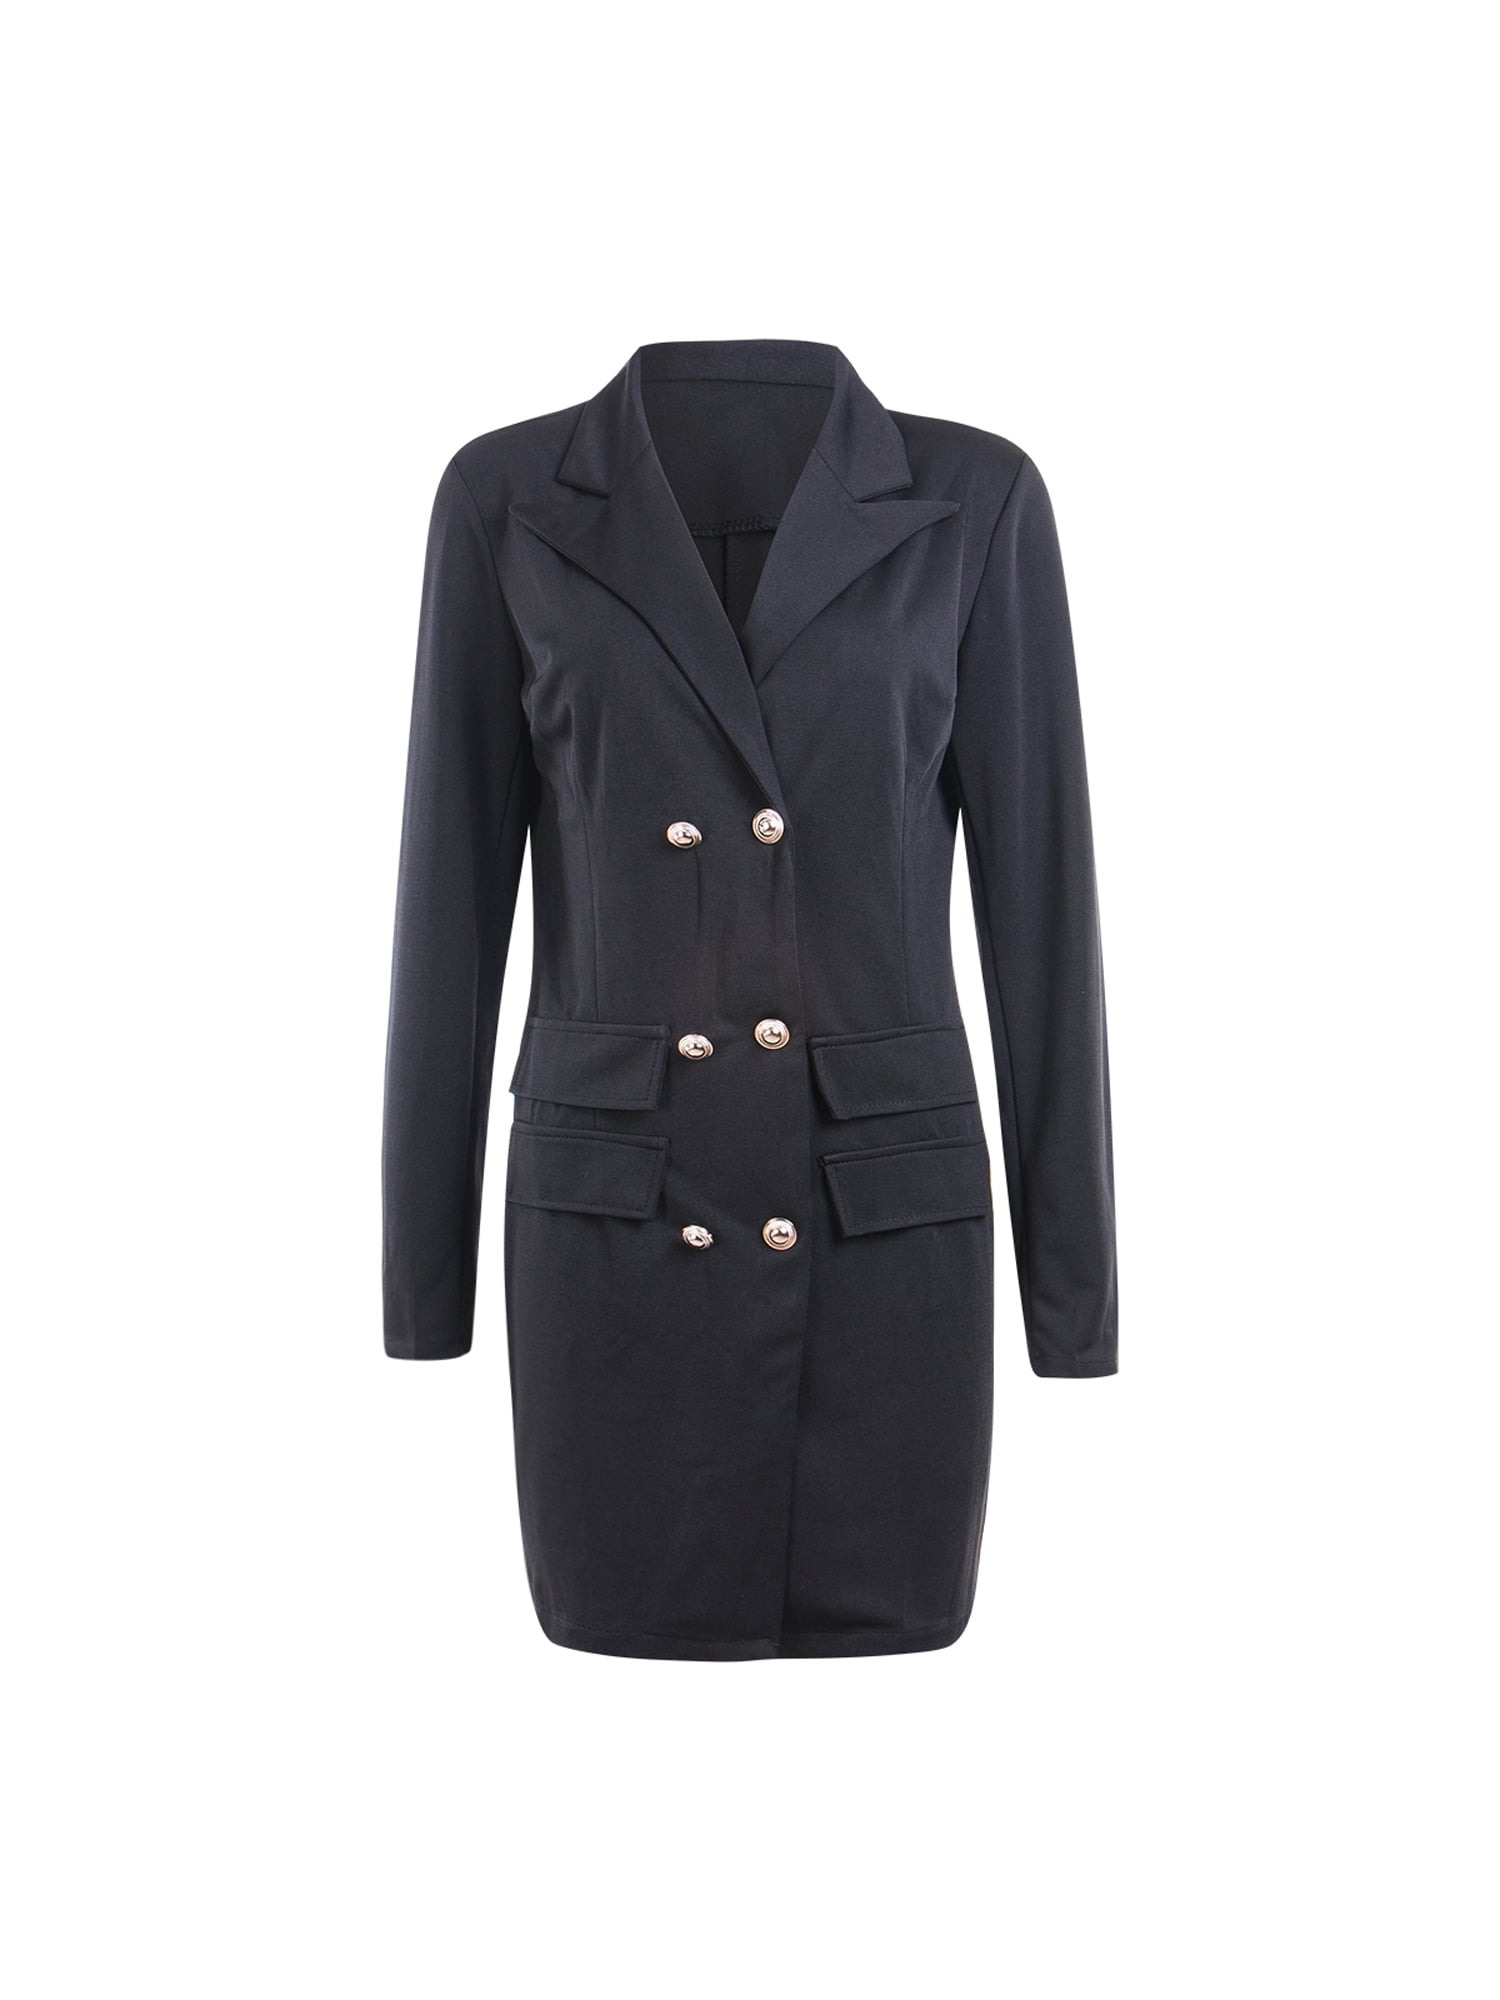 Womens Double Breasted Blazer Suit Military Jacket Lapel Slim Fit Outerwear Coat 